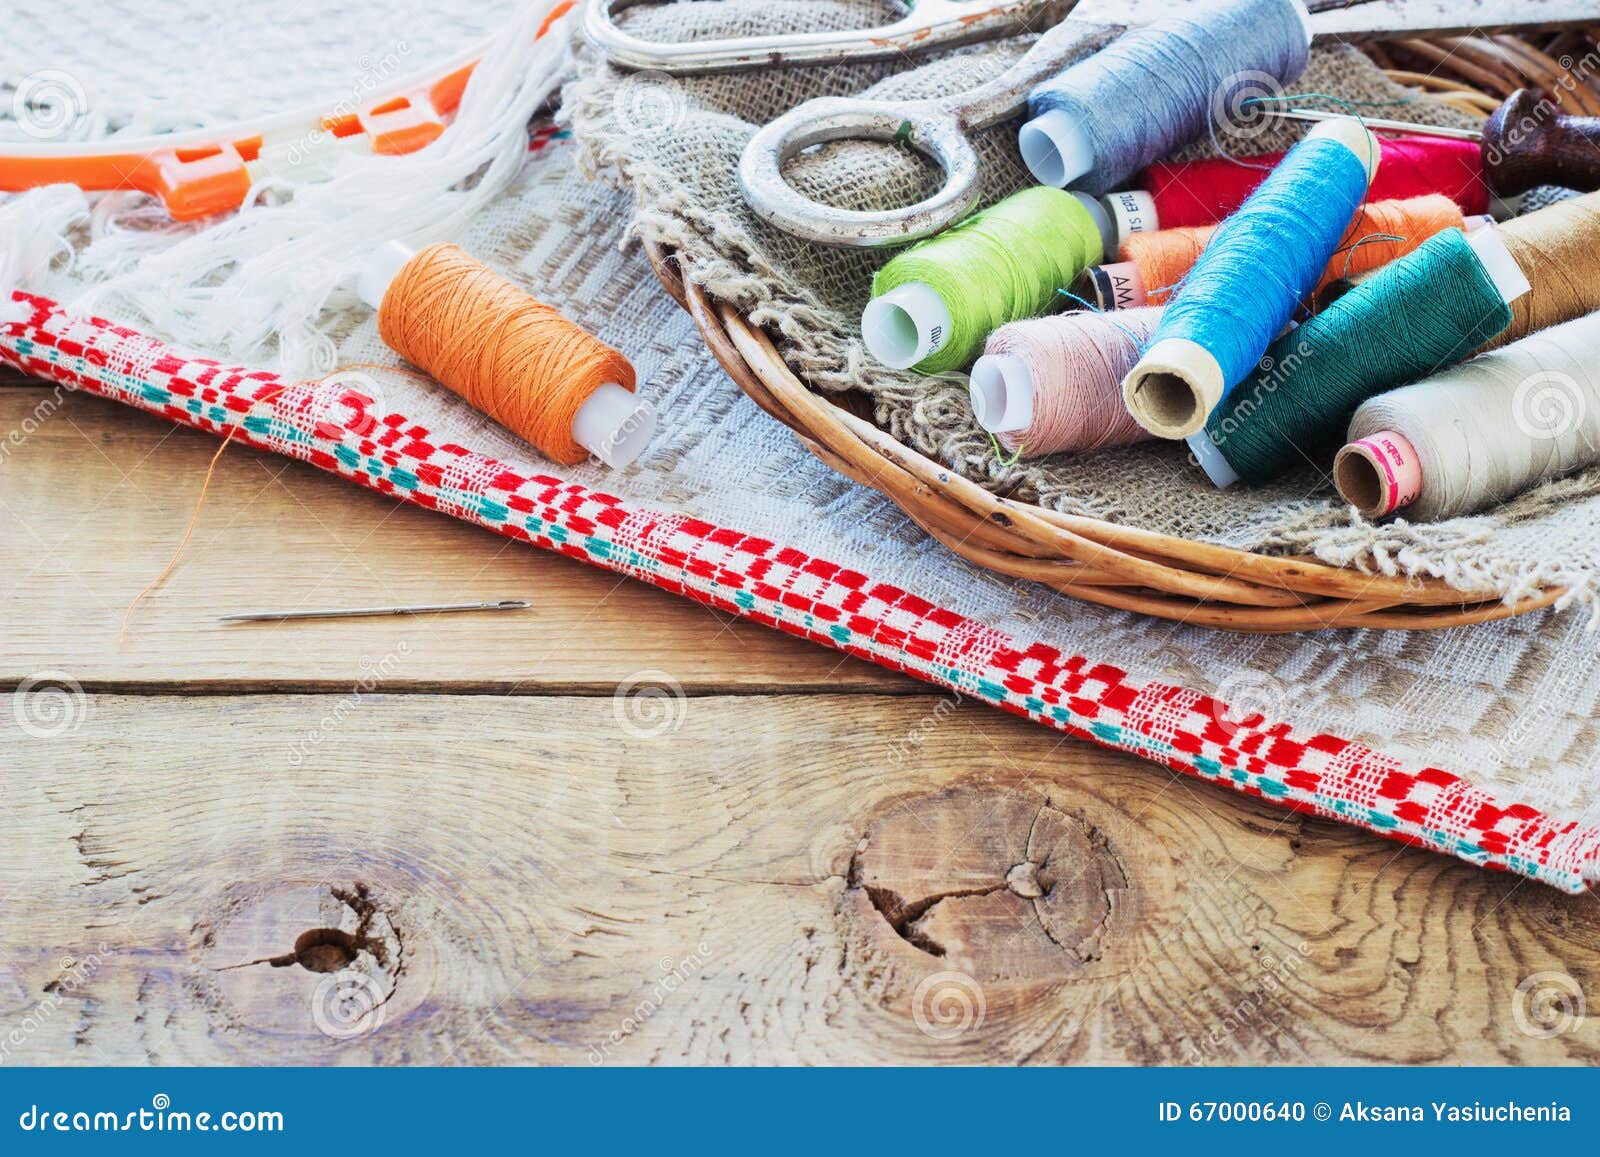 Scissors, Bobbins with Thread and Needles, Striped Fabric. Old Sewing ...